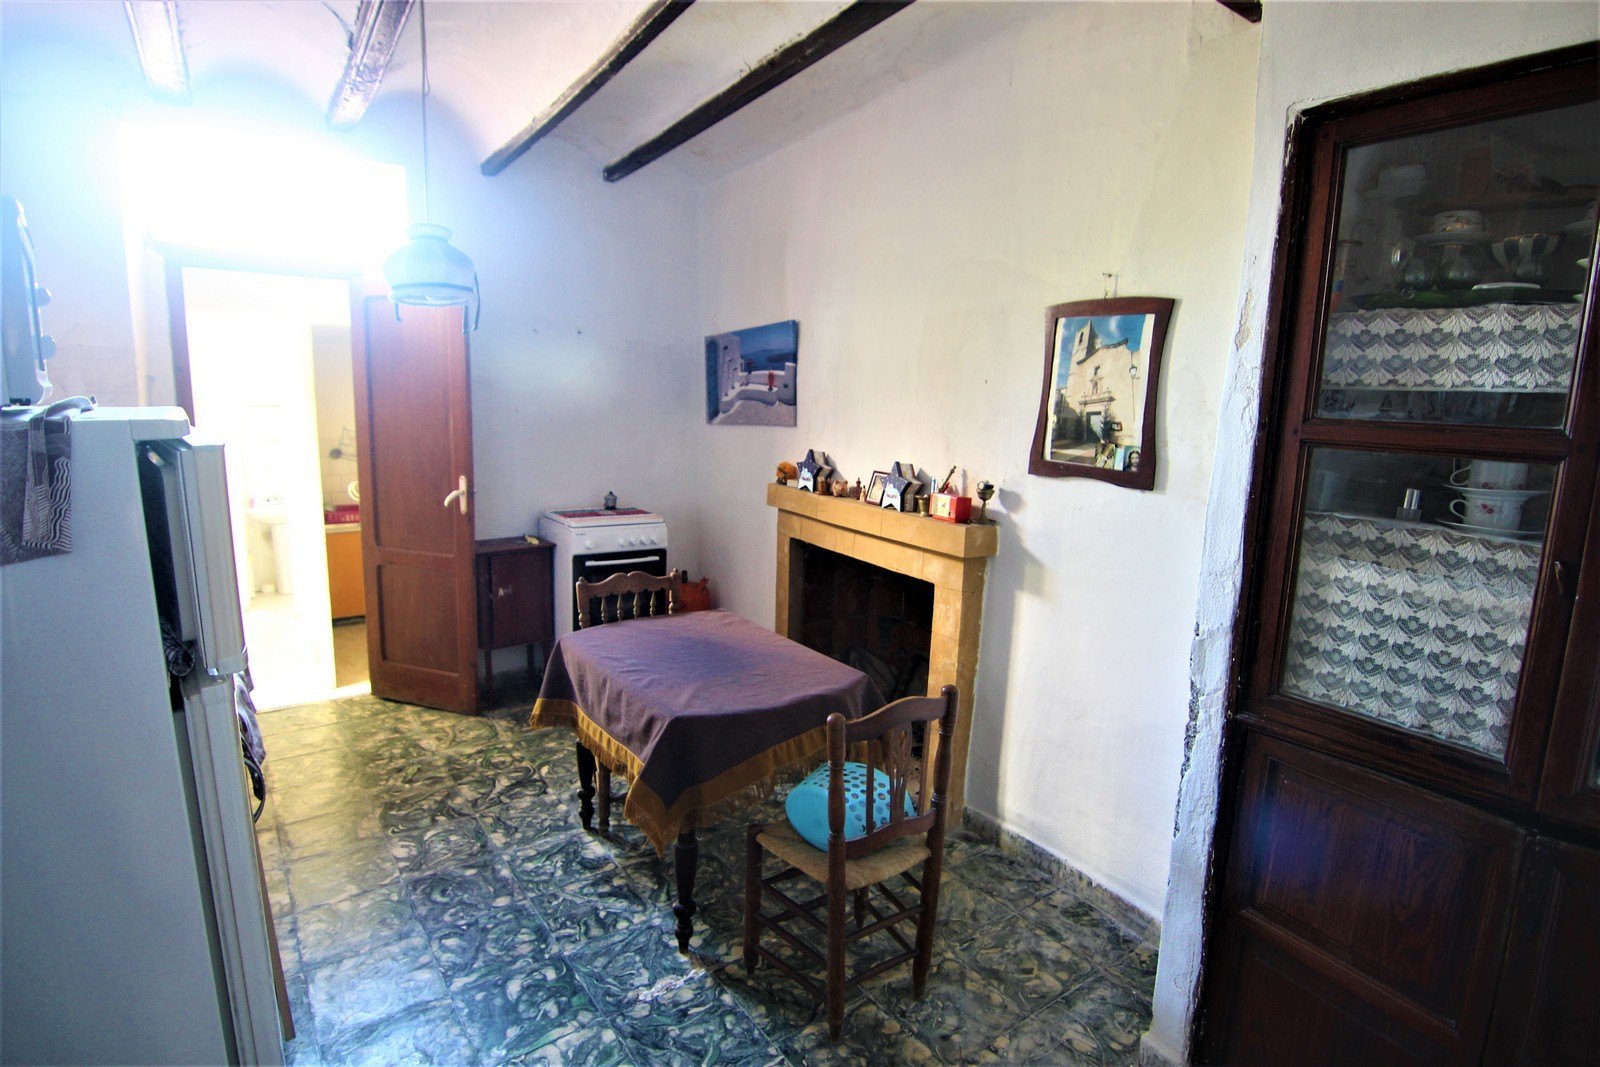 Village house for sale in the center of Benitatxell.